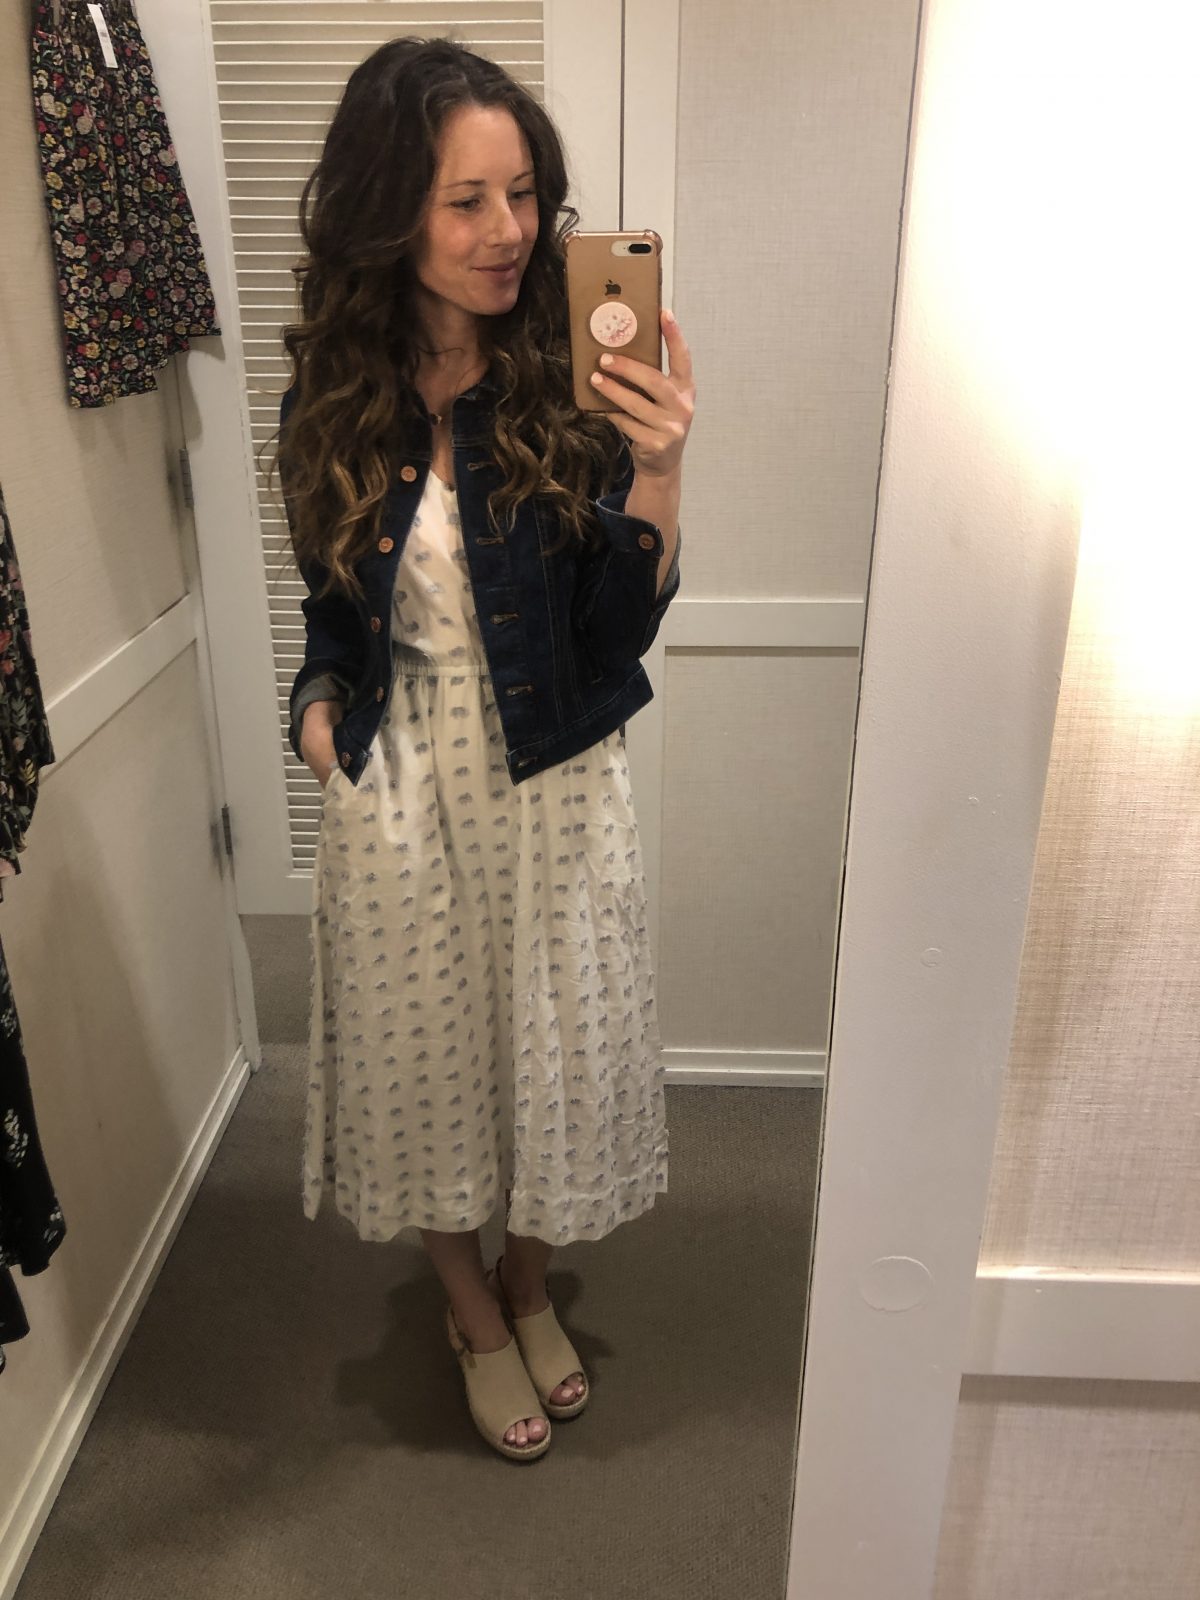 White and blue Patterned Midi Dress with Denim Jacket and Tan Peep Toe Slingback Espadrille on Woman at LOFT Confessions of a Northern Belle